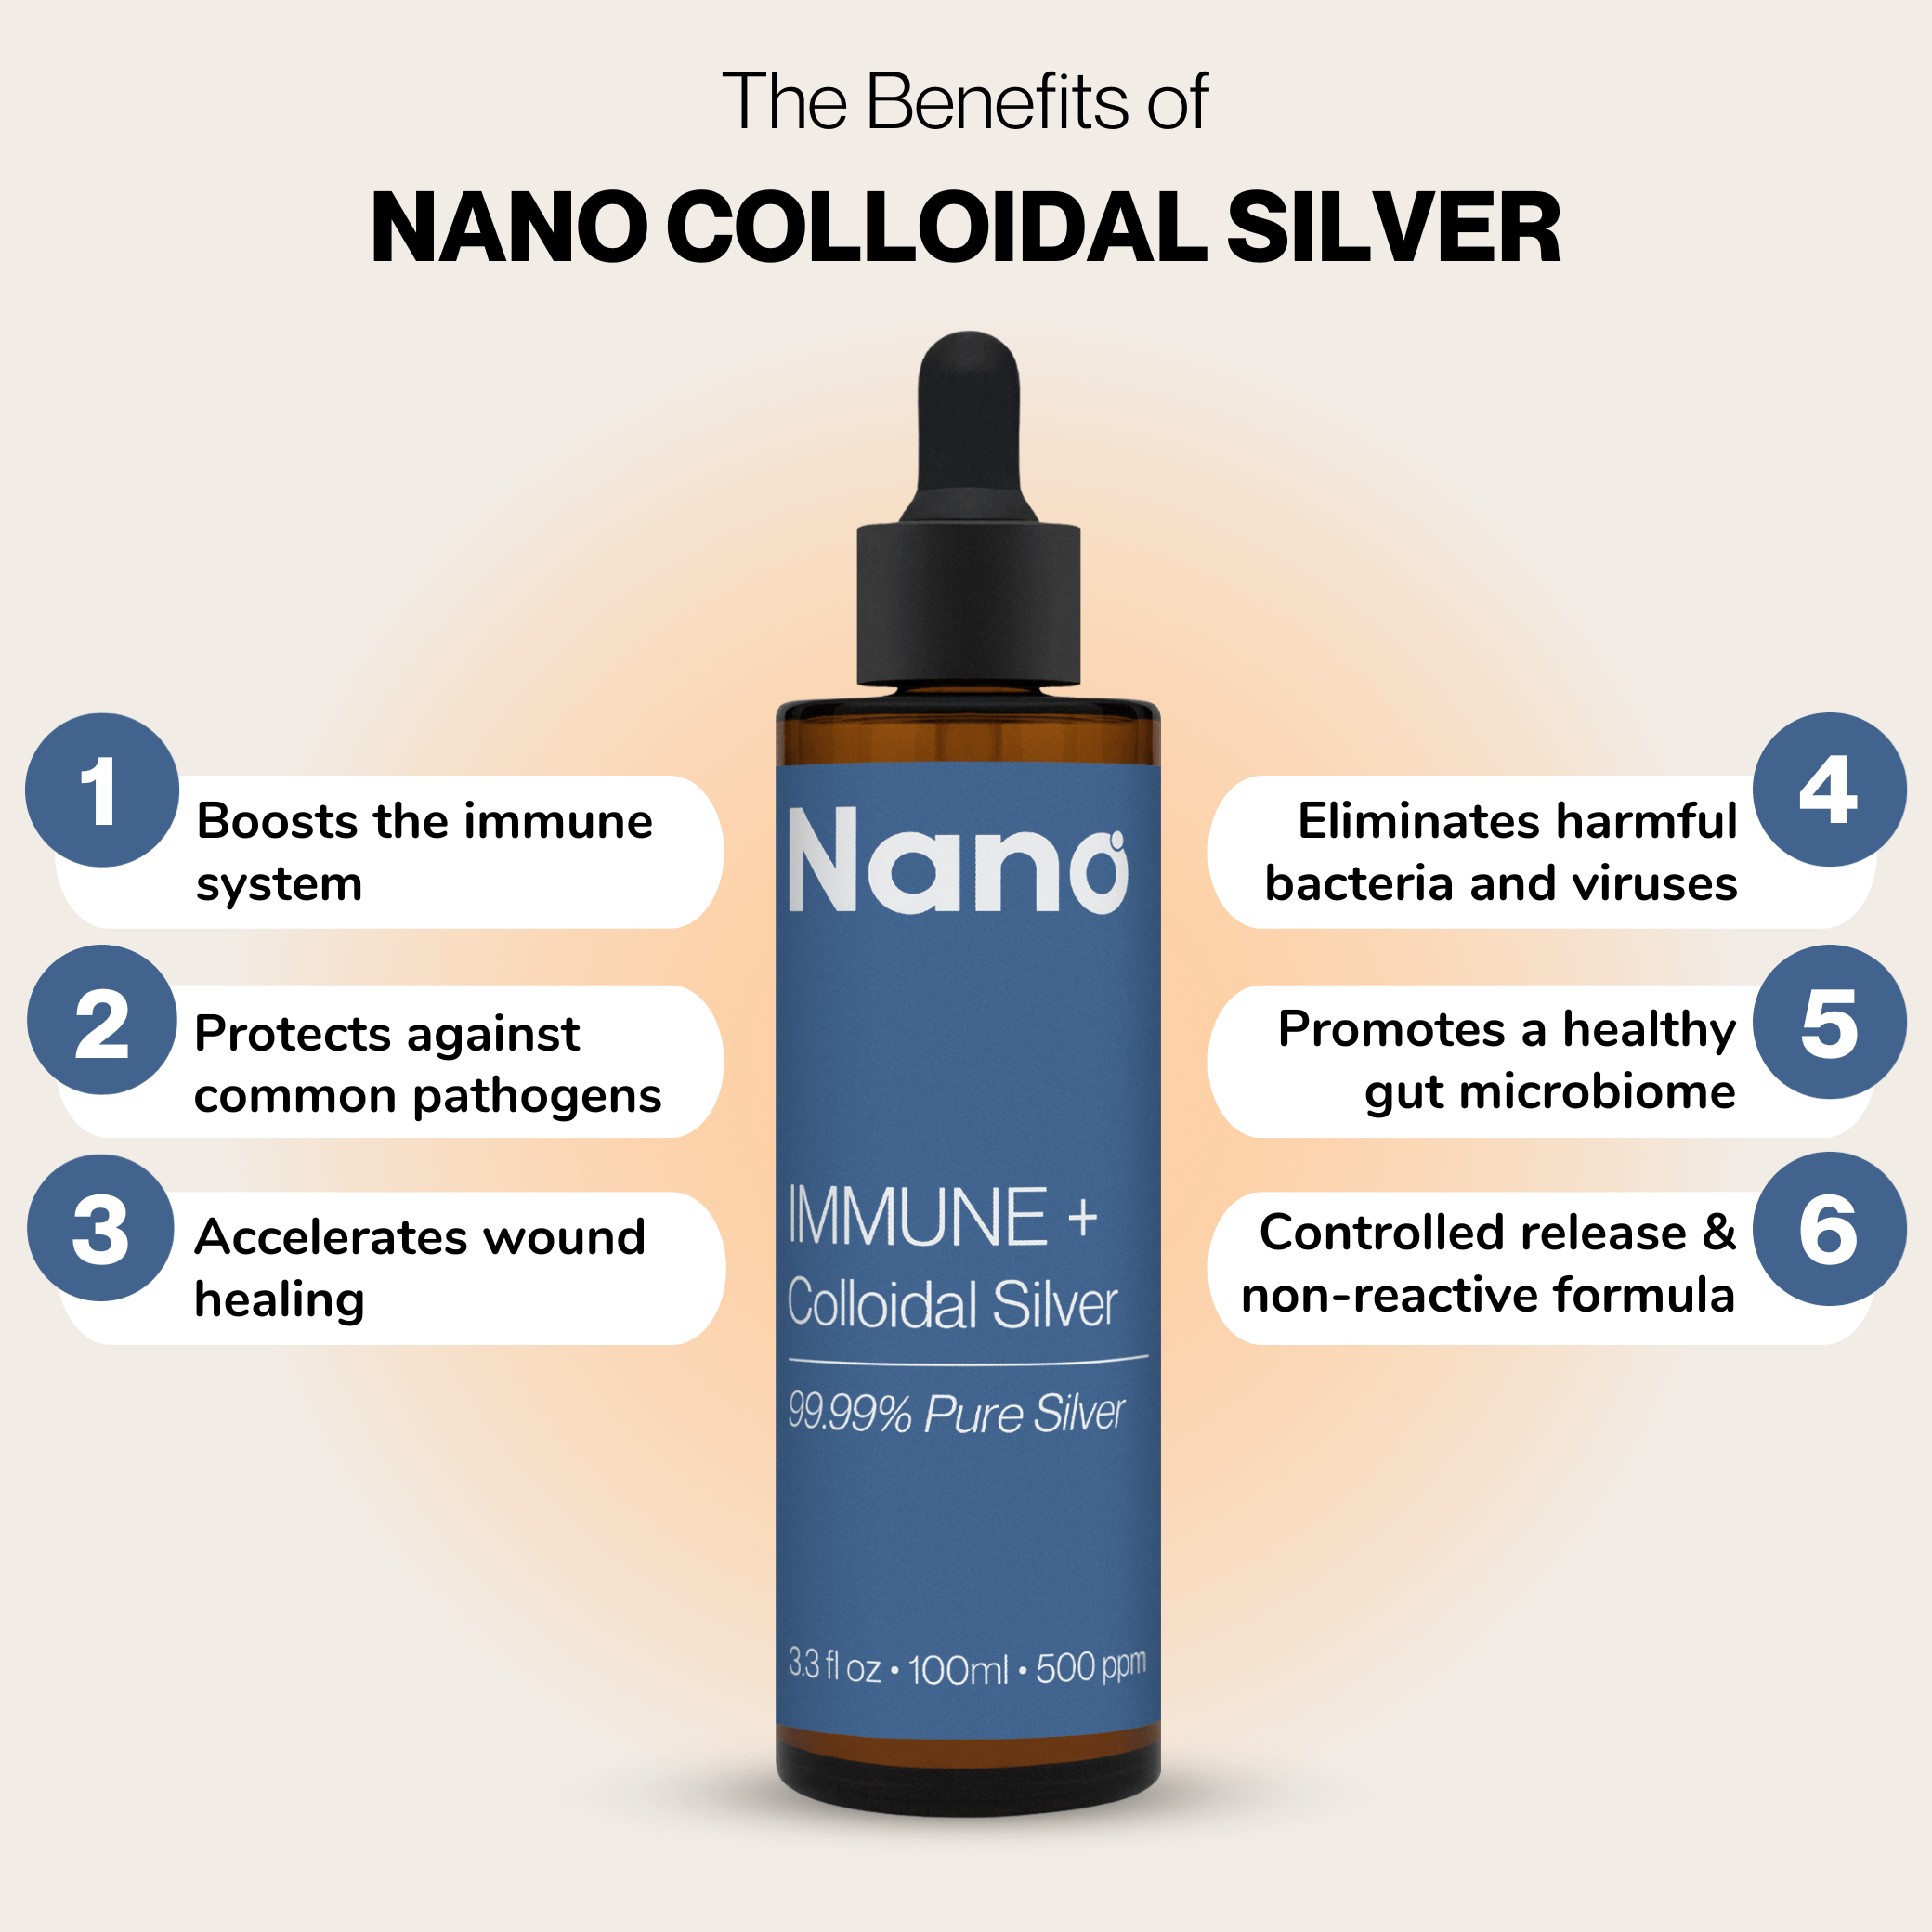 The benefits of Nano 500 ppm Immune plus colloidal silver. Boosts the immune system. Protects against common pathogens. Accelerates wound healing. Eliminates harmful bacteria and viruses. Promotes a healthy gut microbiome. Non-reactive and controlled release